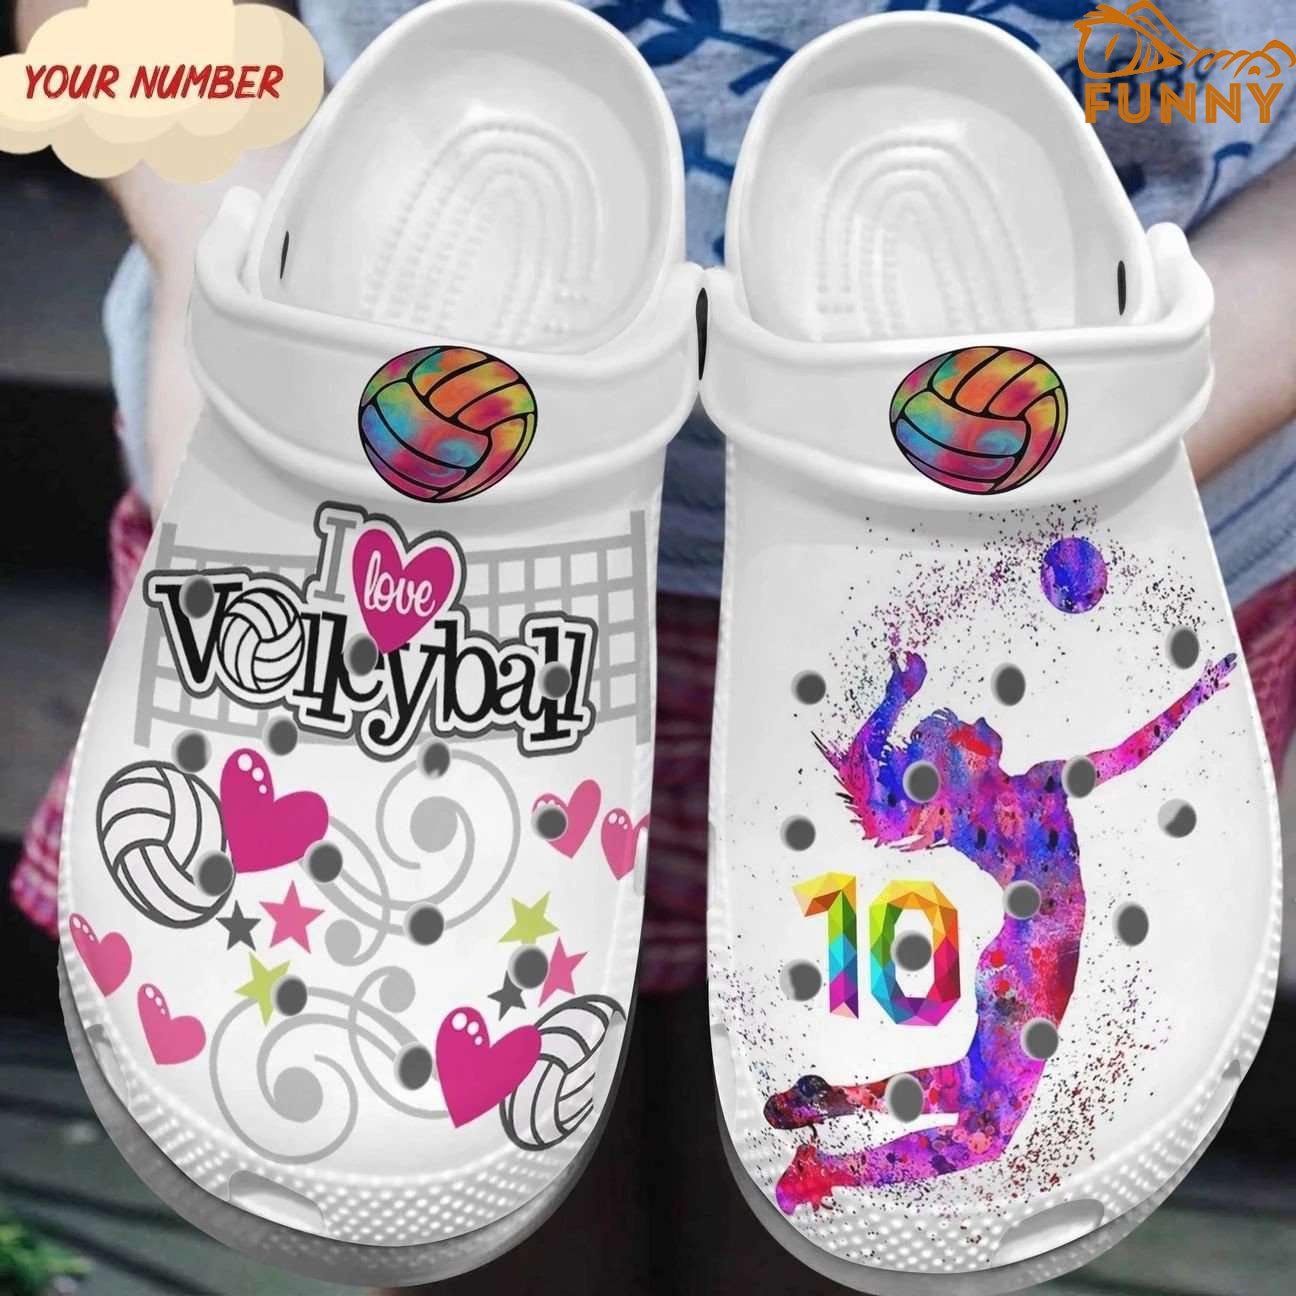 Get Sporty in Custom Number Volleyball Crocs - Order Now!